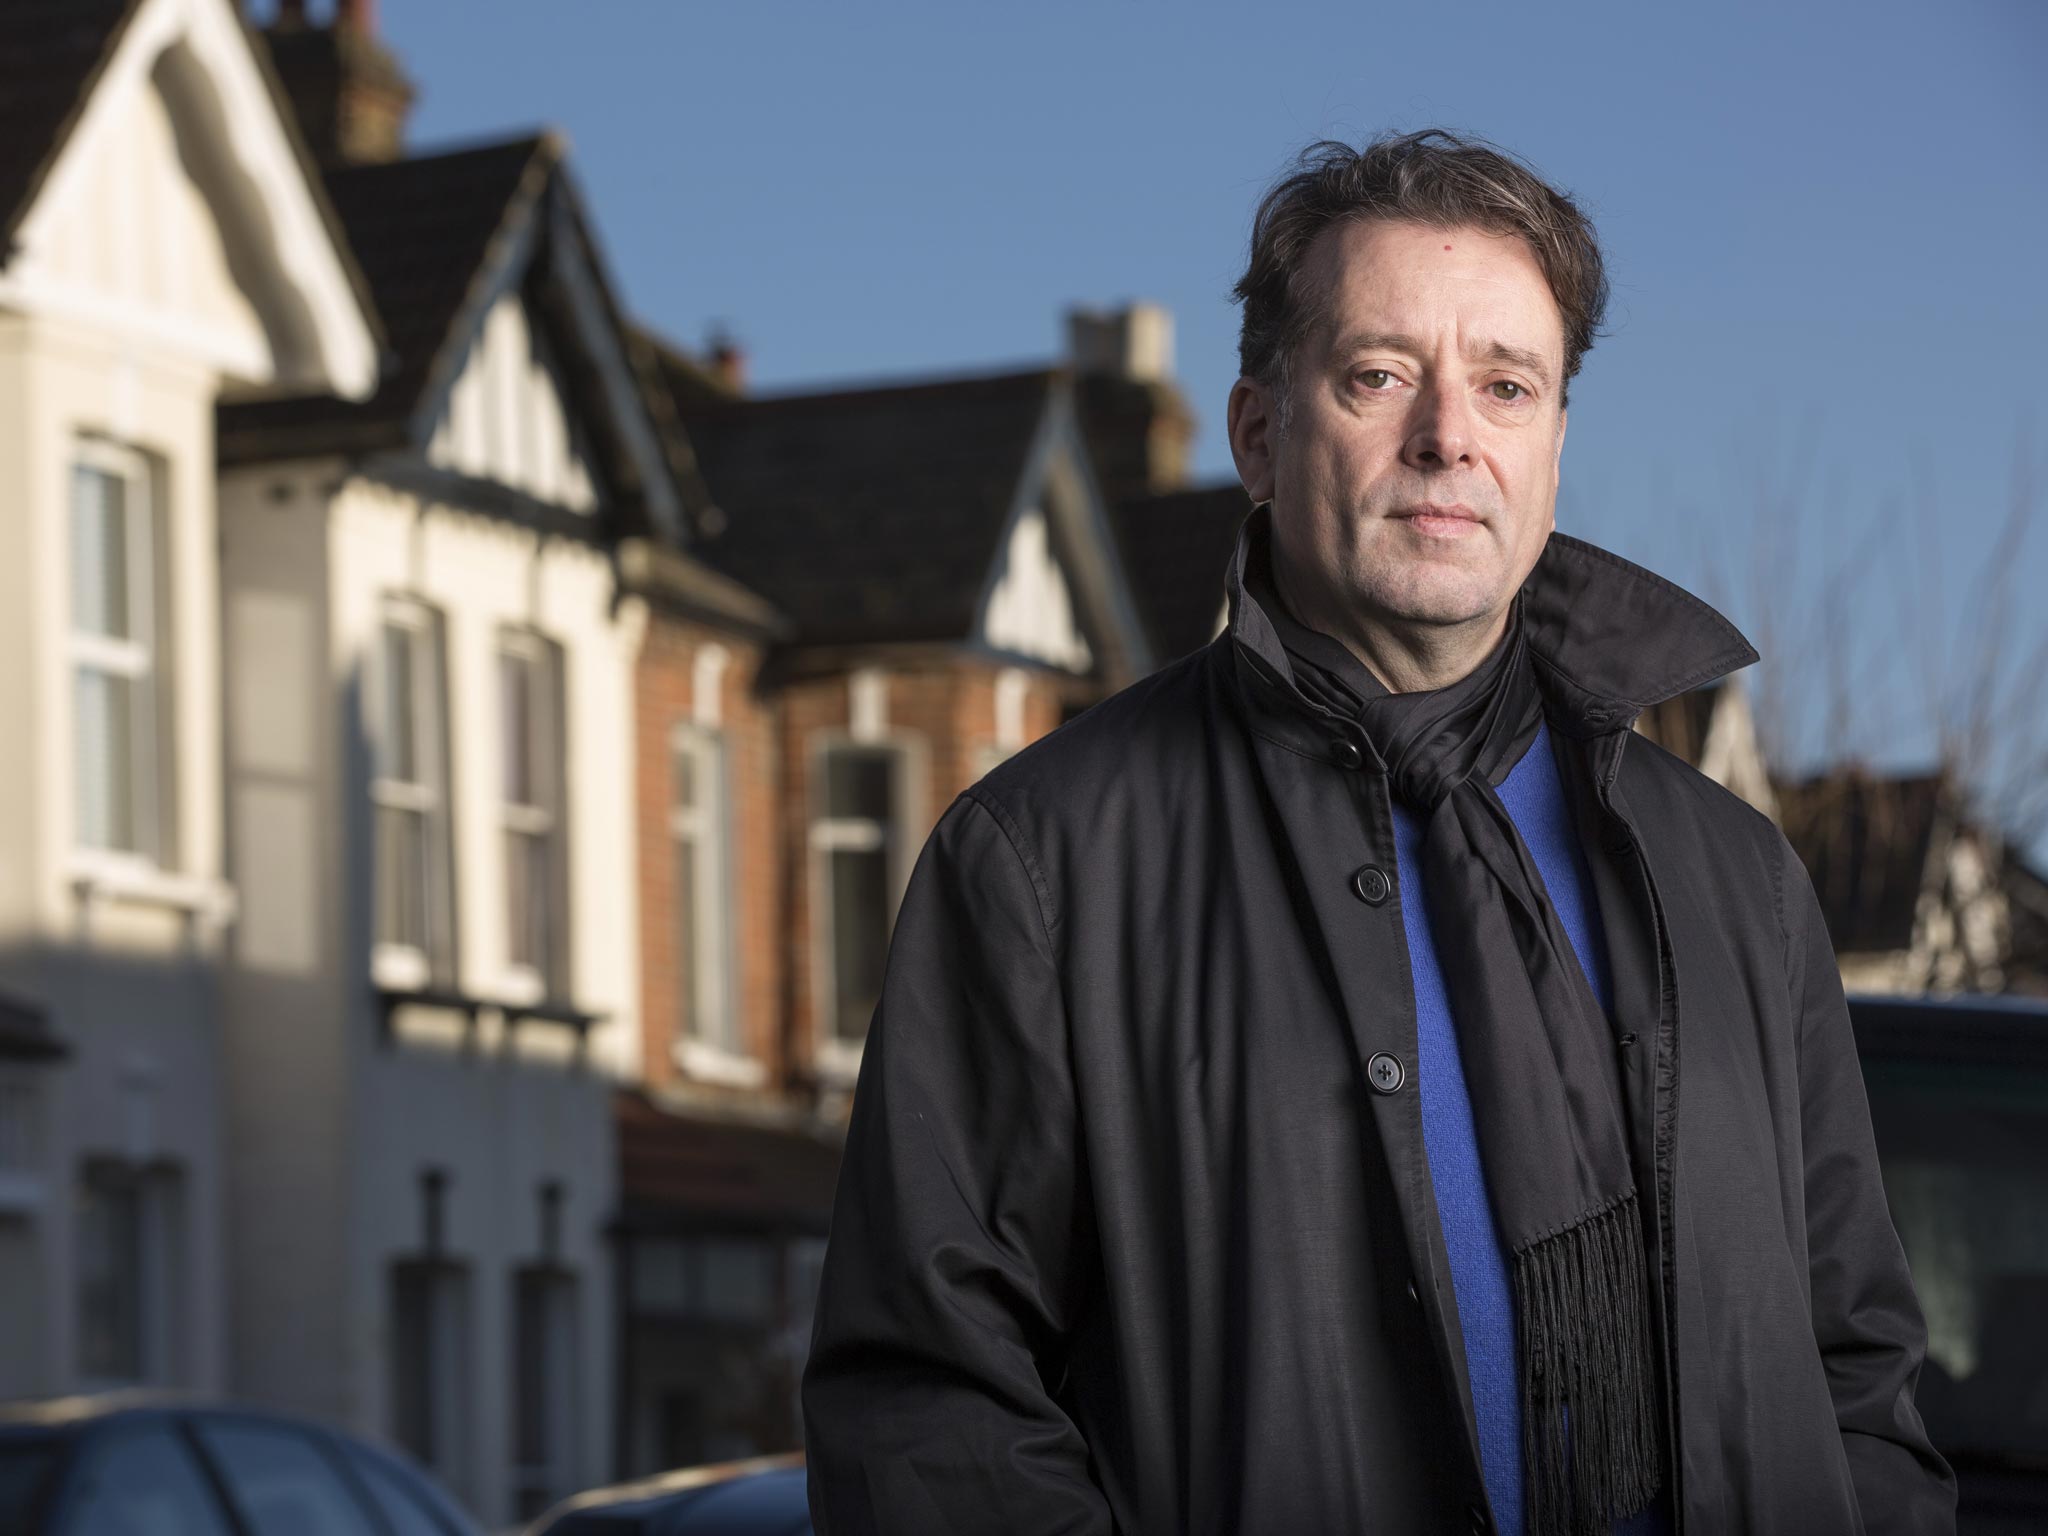 Simon Read spearheaded The Independent’s campaign to curb the excesses of payday lenders